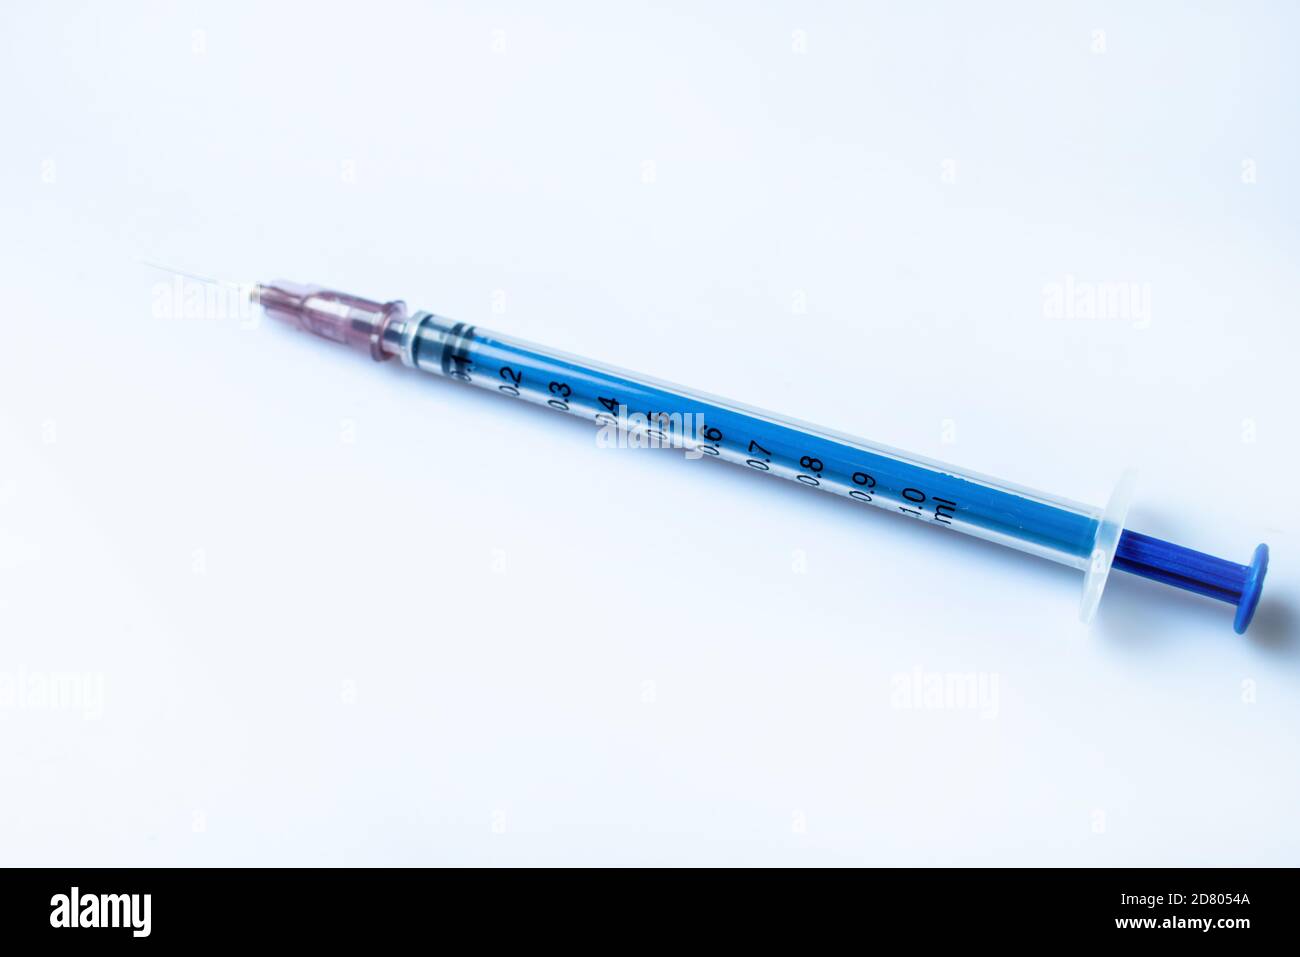 The syringe is isolated on a white background Stock Photo